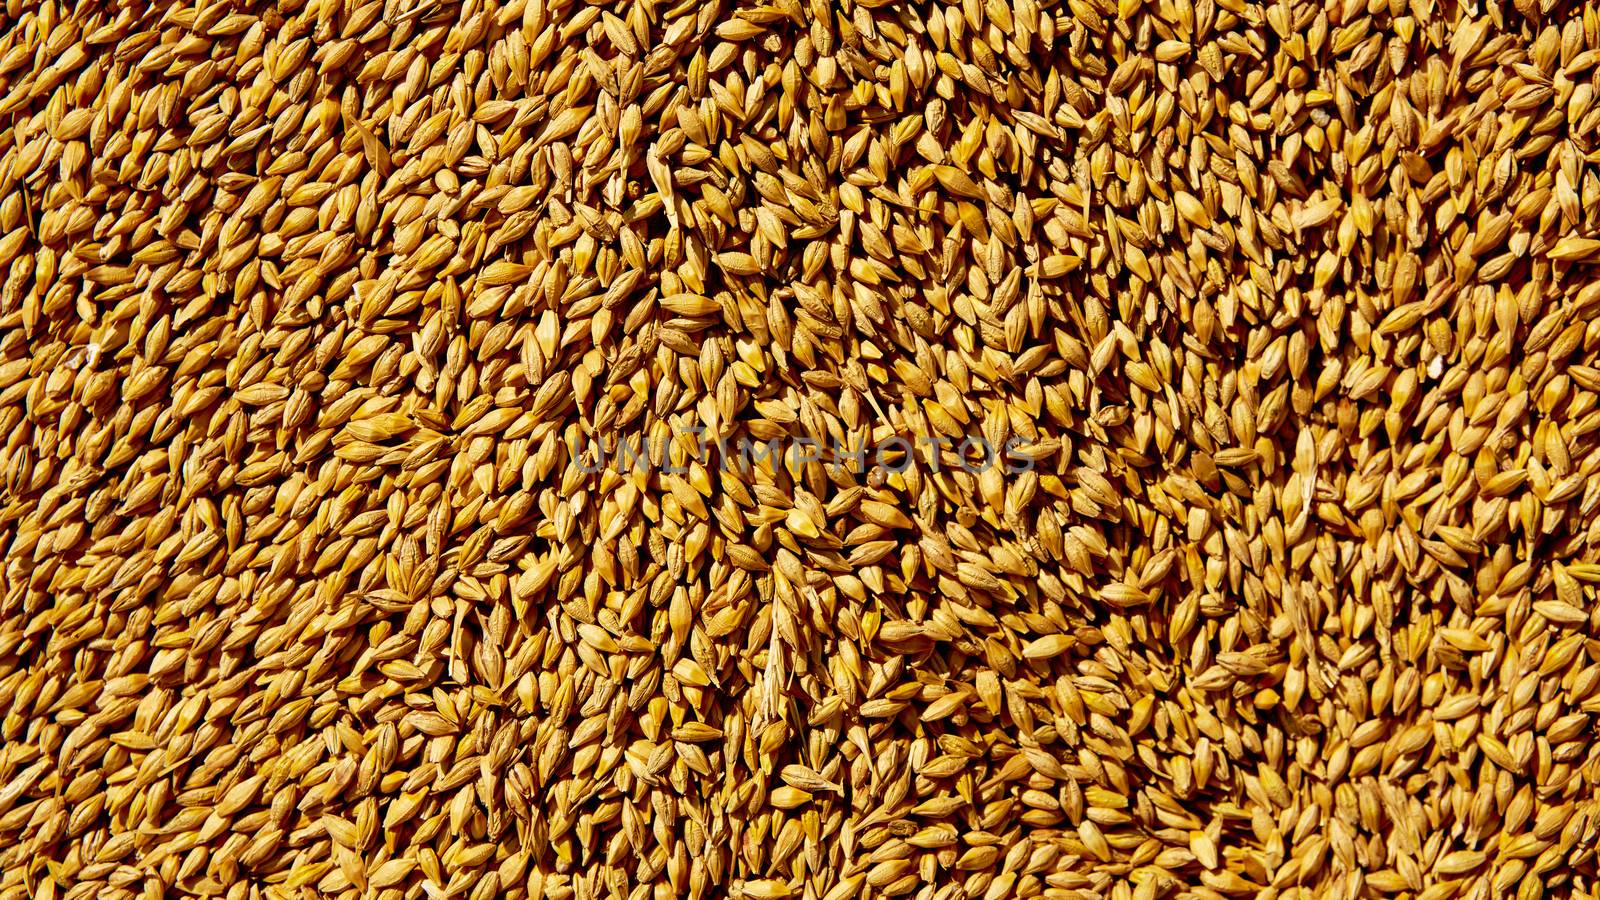 Grains of wheat close-up. Wheat texture background